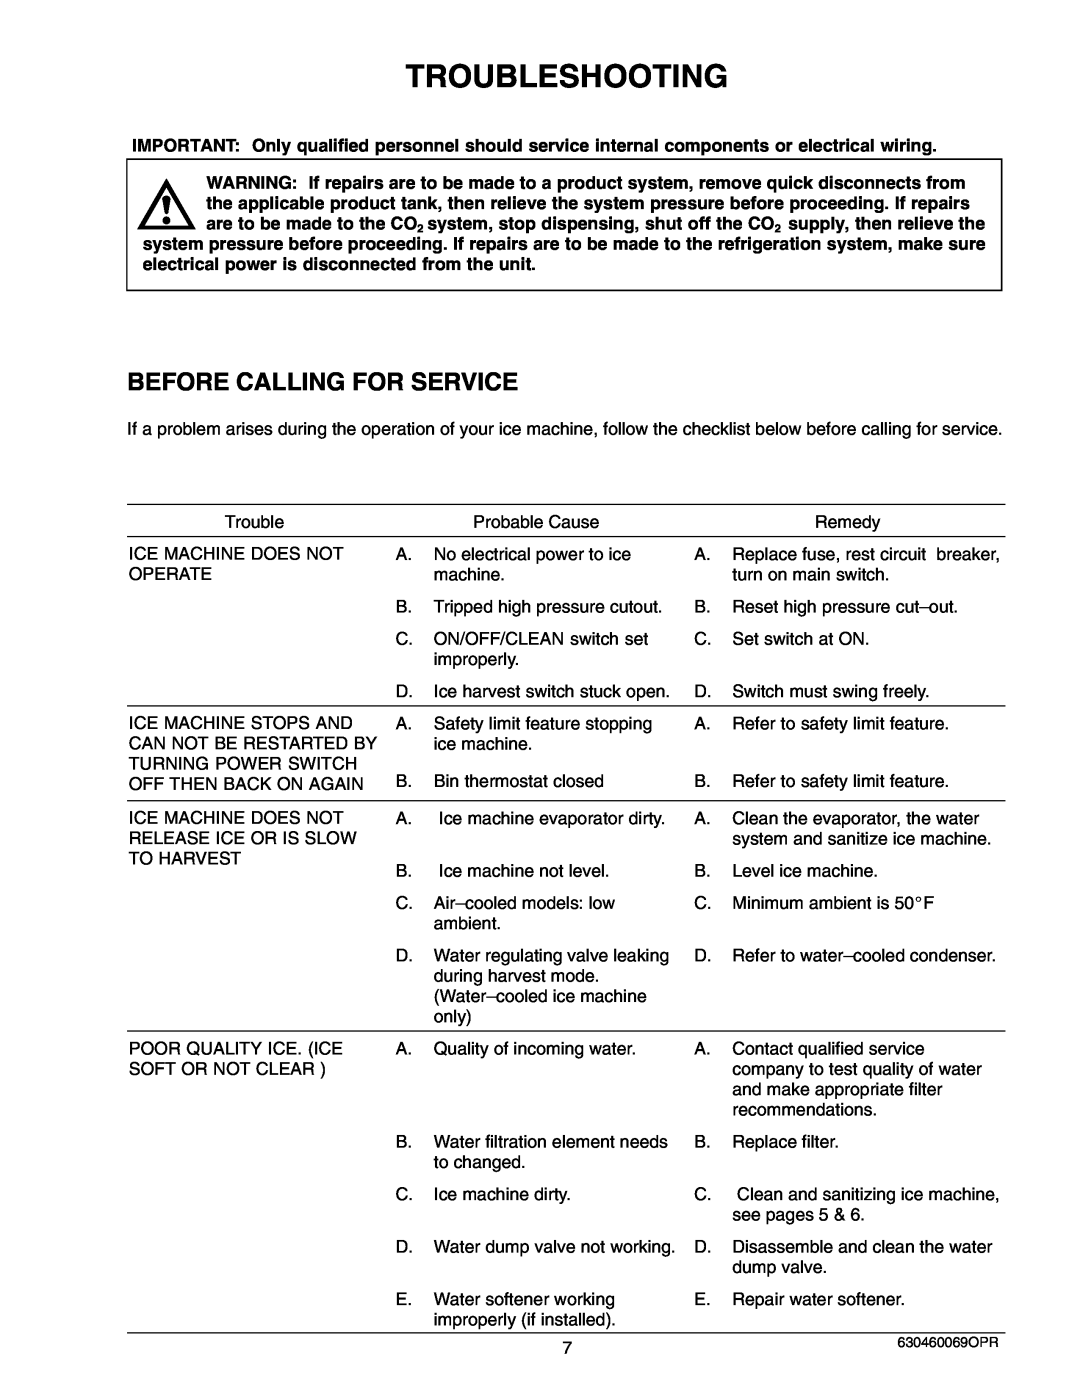 Maytag 224 manual Troubleshooting, Before Calling For Service 